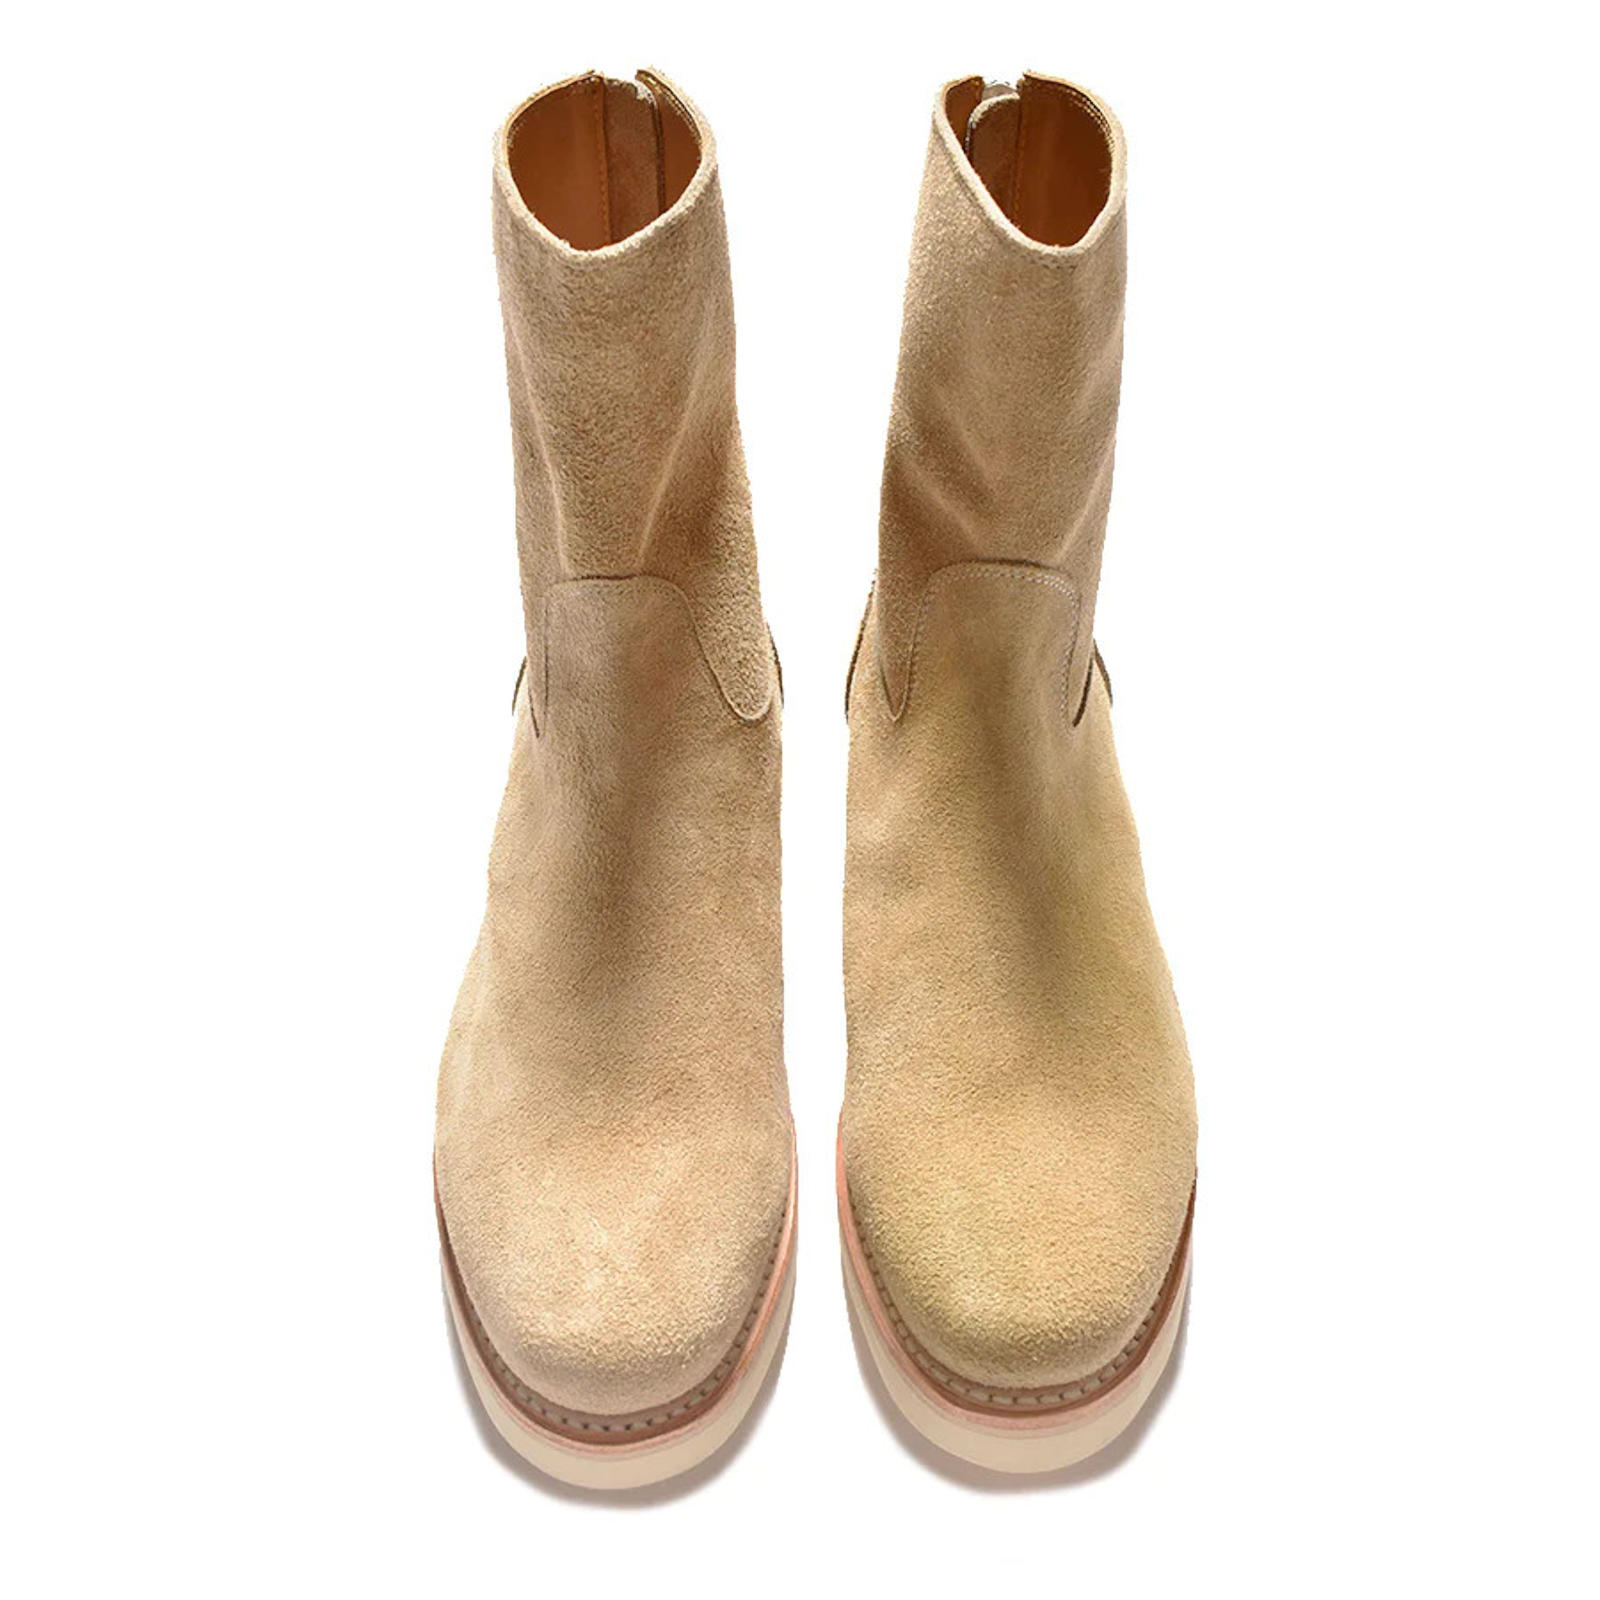 MINEDENIM : Suede Leather Back Zip Boots